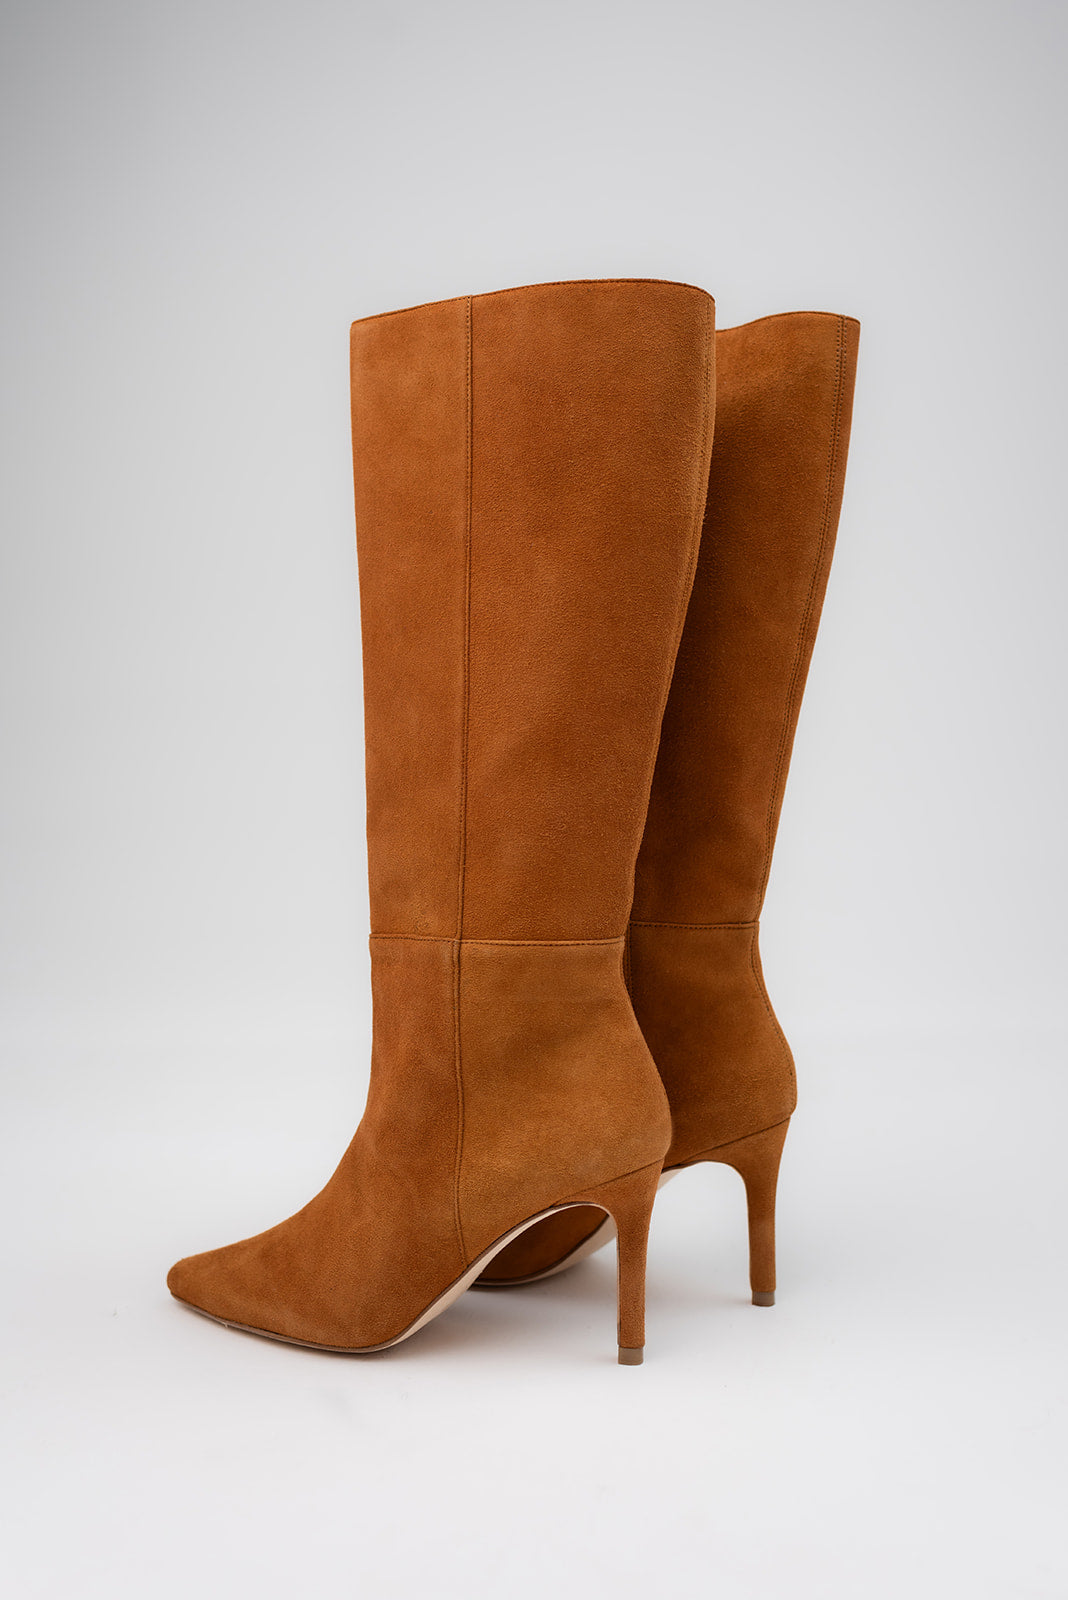 Celina TALL BOOT- SUEDE